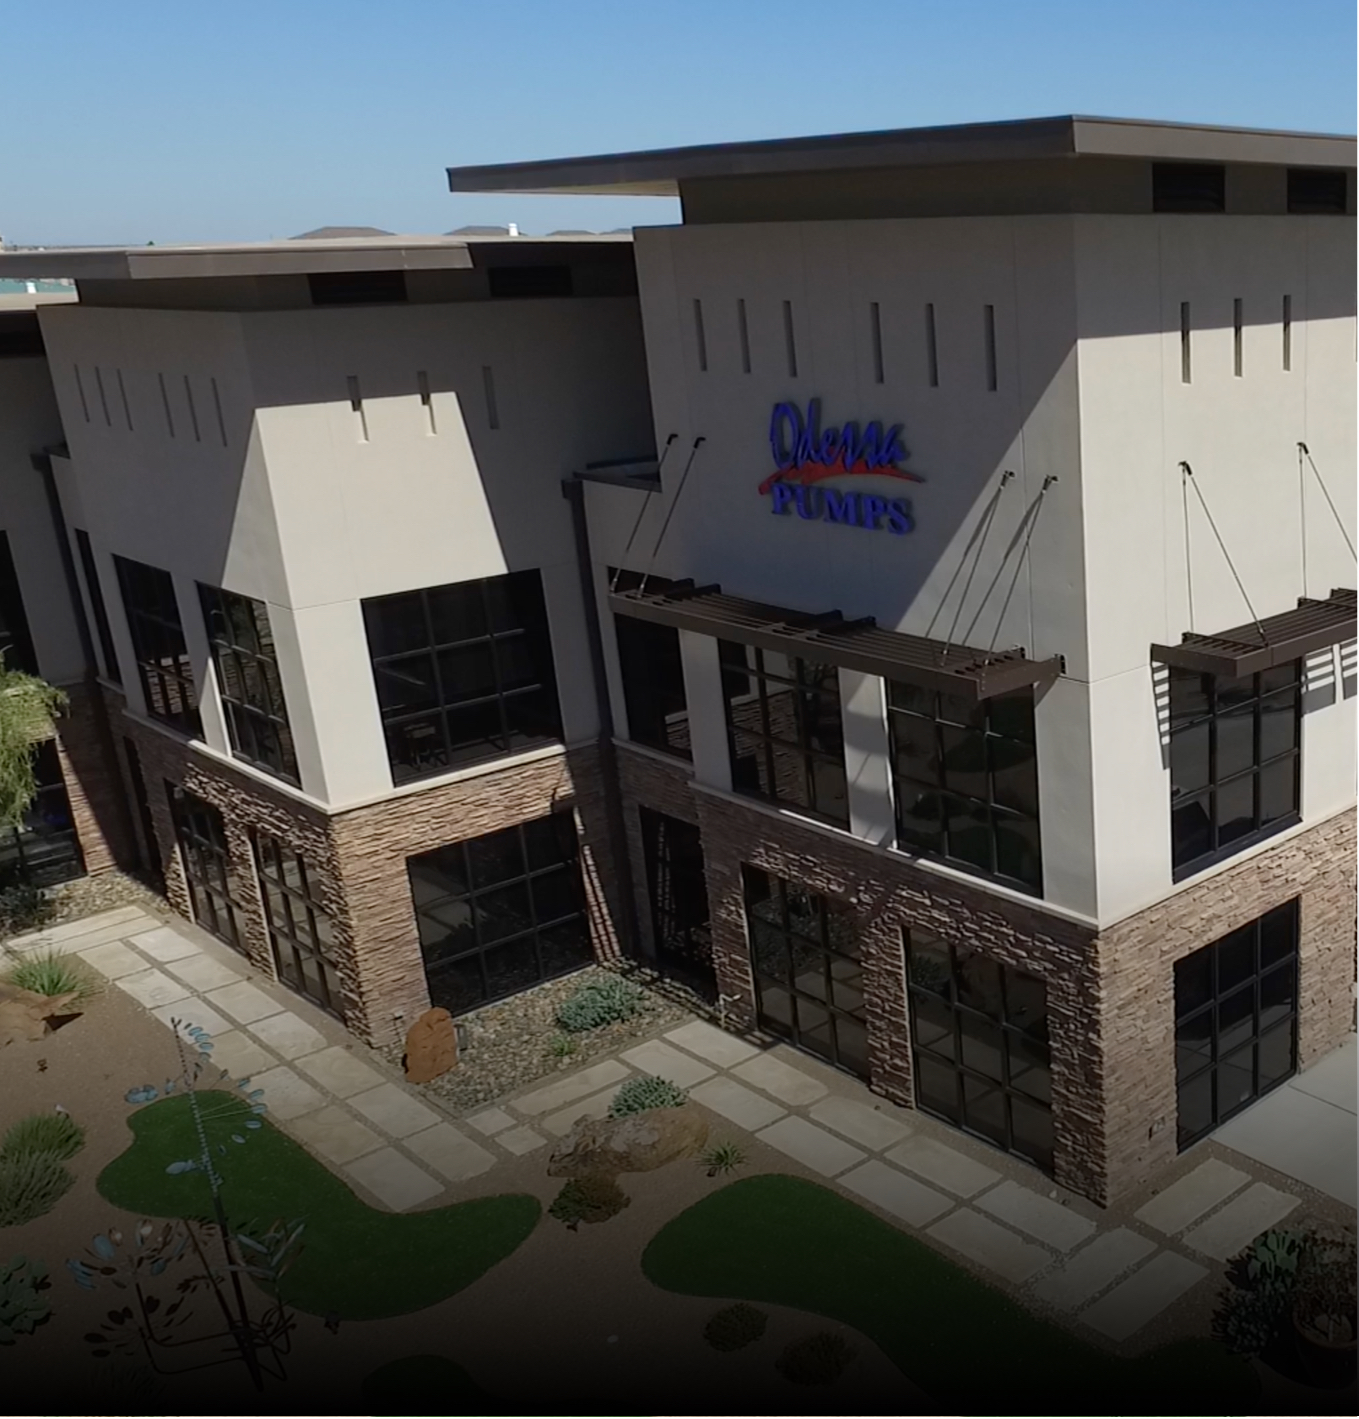 Angled front view of stucco commericial build for pipeline construction in Midland TX. Featuring brick facade and steel frame